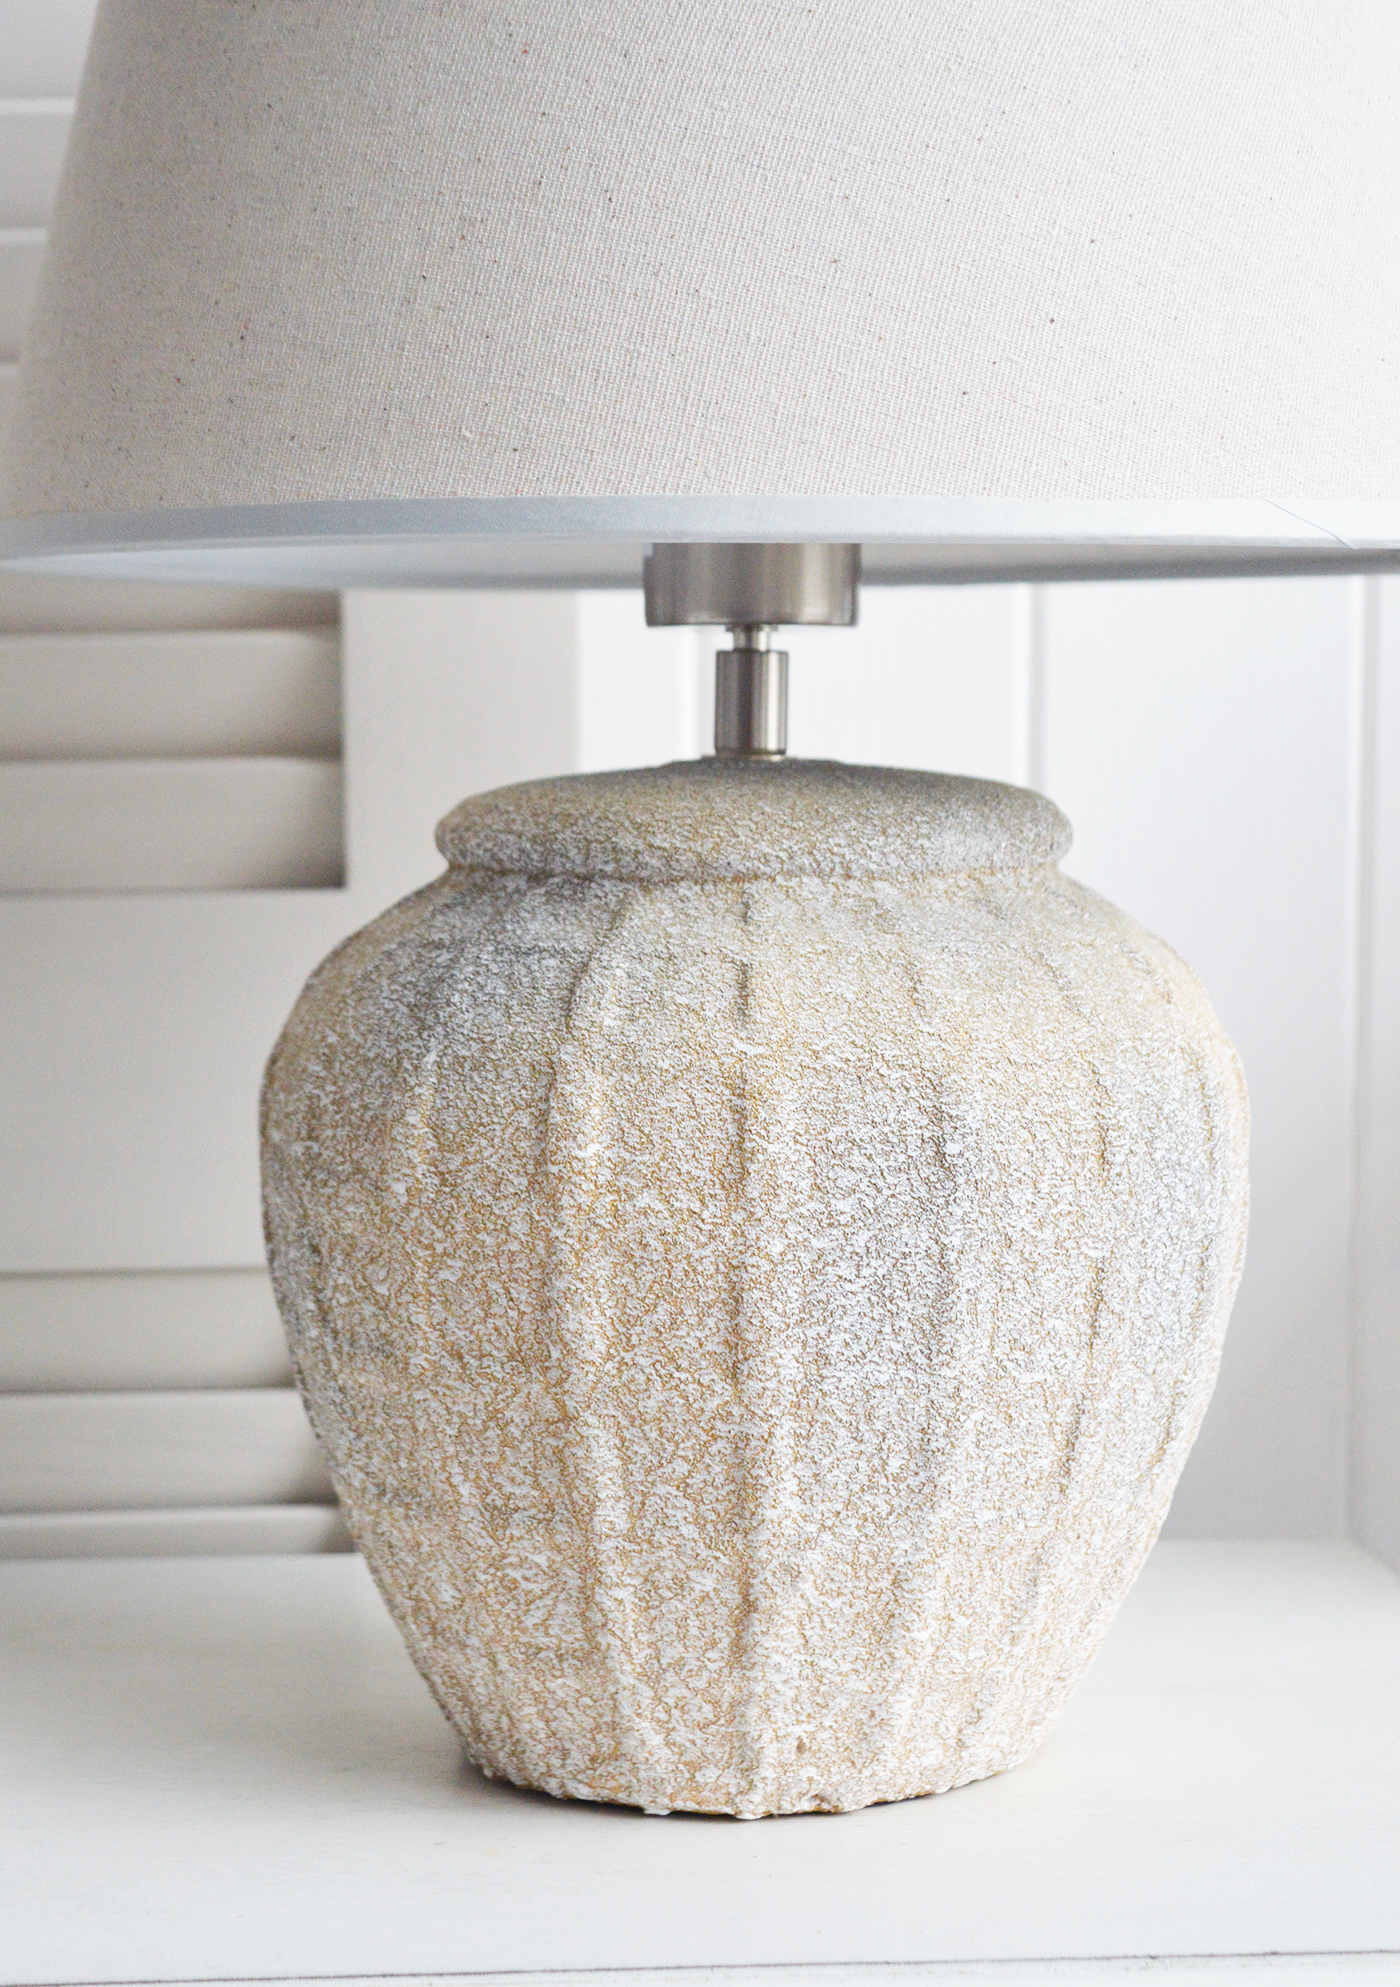 The Ludlow lamp - New England Style table stone lamps to complement country, coastal and city furniture and home interiors from The White Lighthouse Furniture